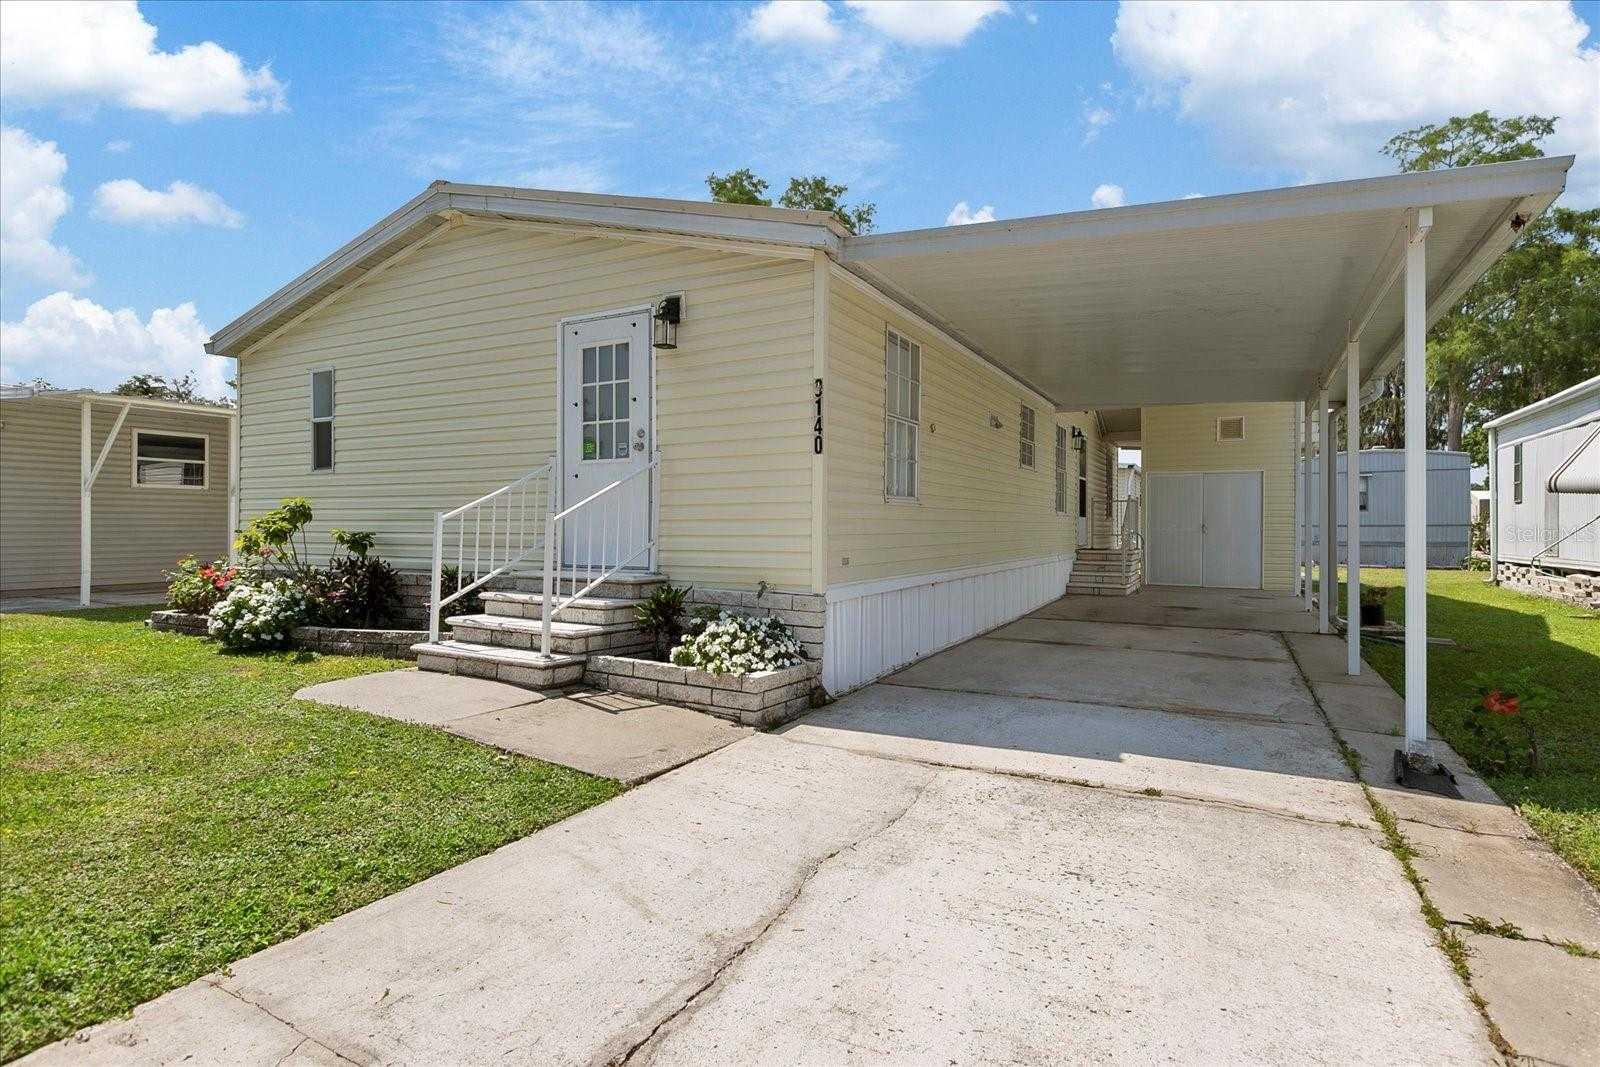 9140 BERKSHIRE LN, TAMPA, Manufactured Home - Post 1977,  for sale, PROPERTY EXPERTS 